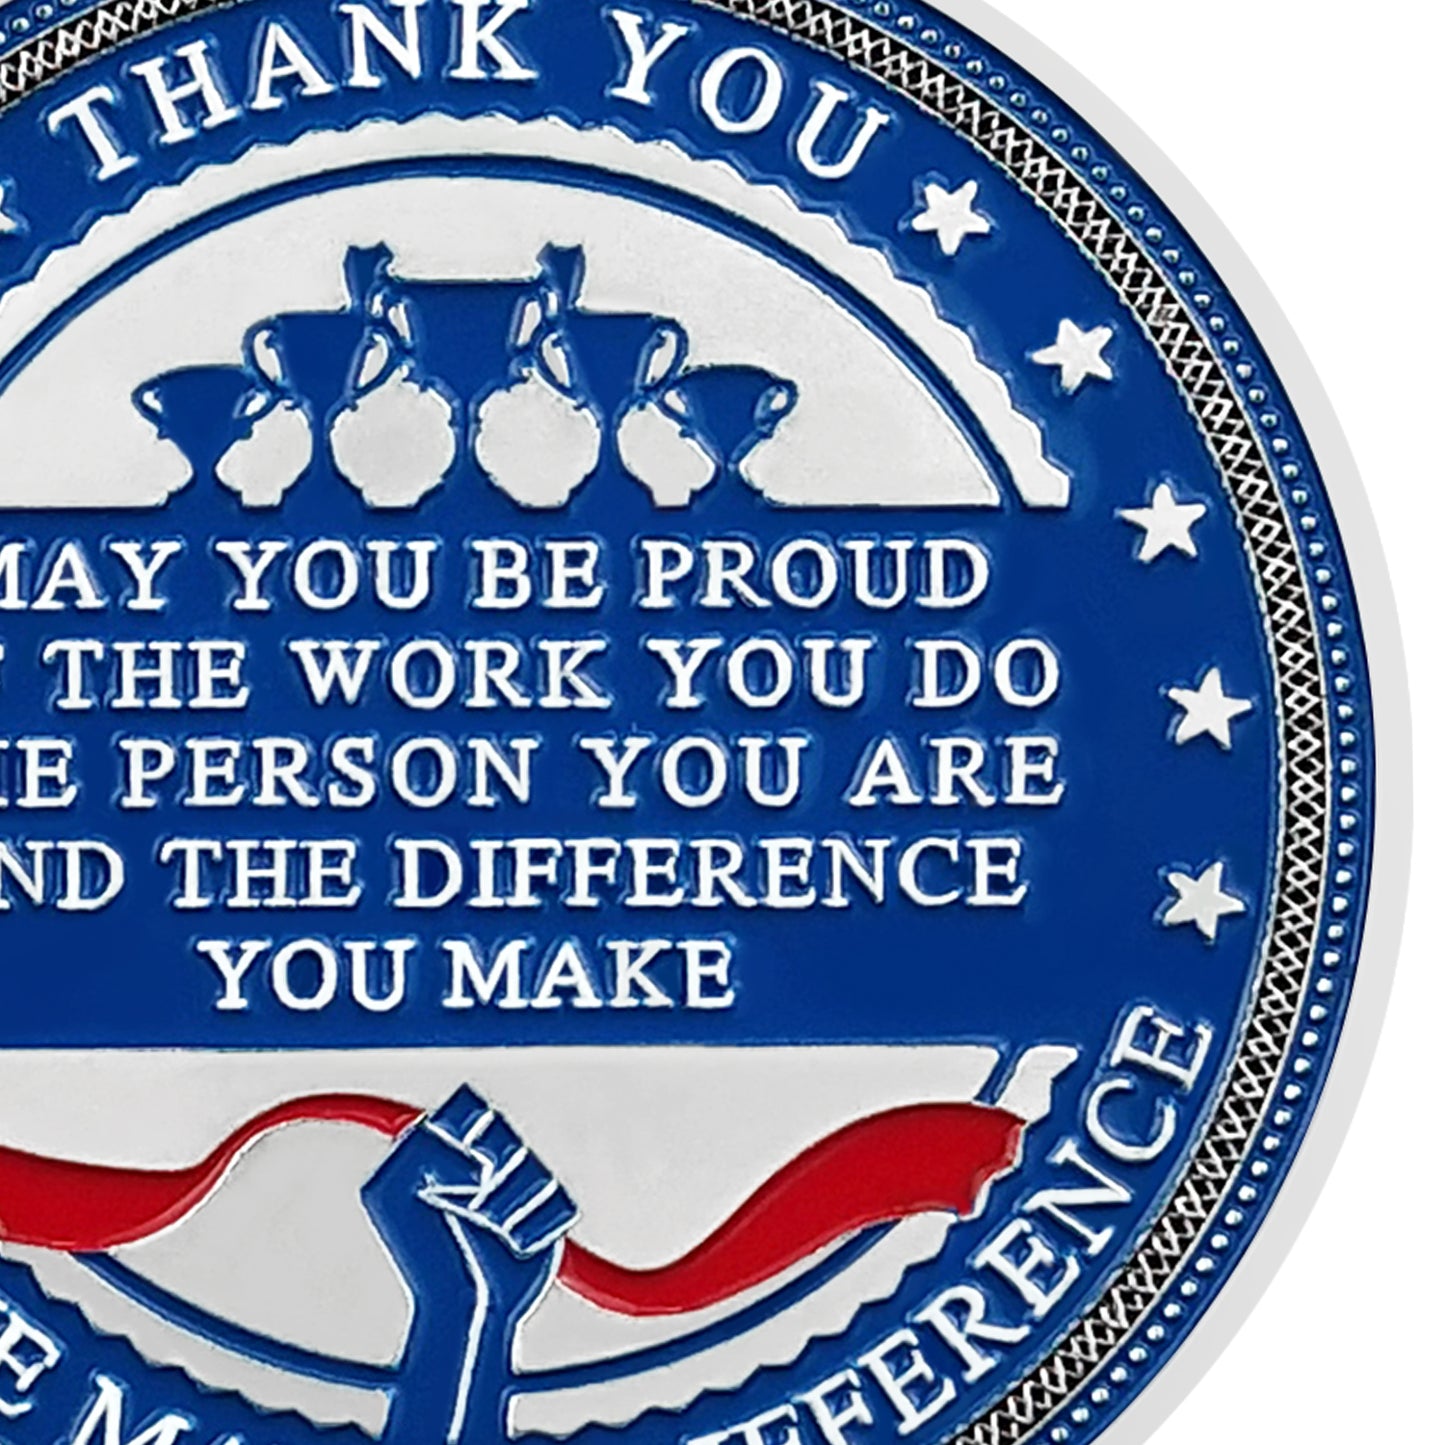 Encouragement Challenge Coin-Employee Appreciation Gifts Inspirational Thank You Coin for Students and Cowokers-Team Spirit